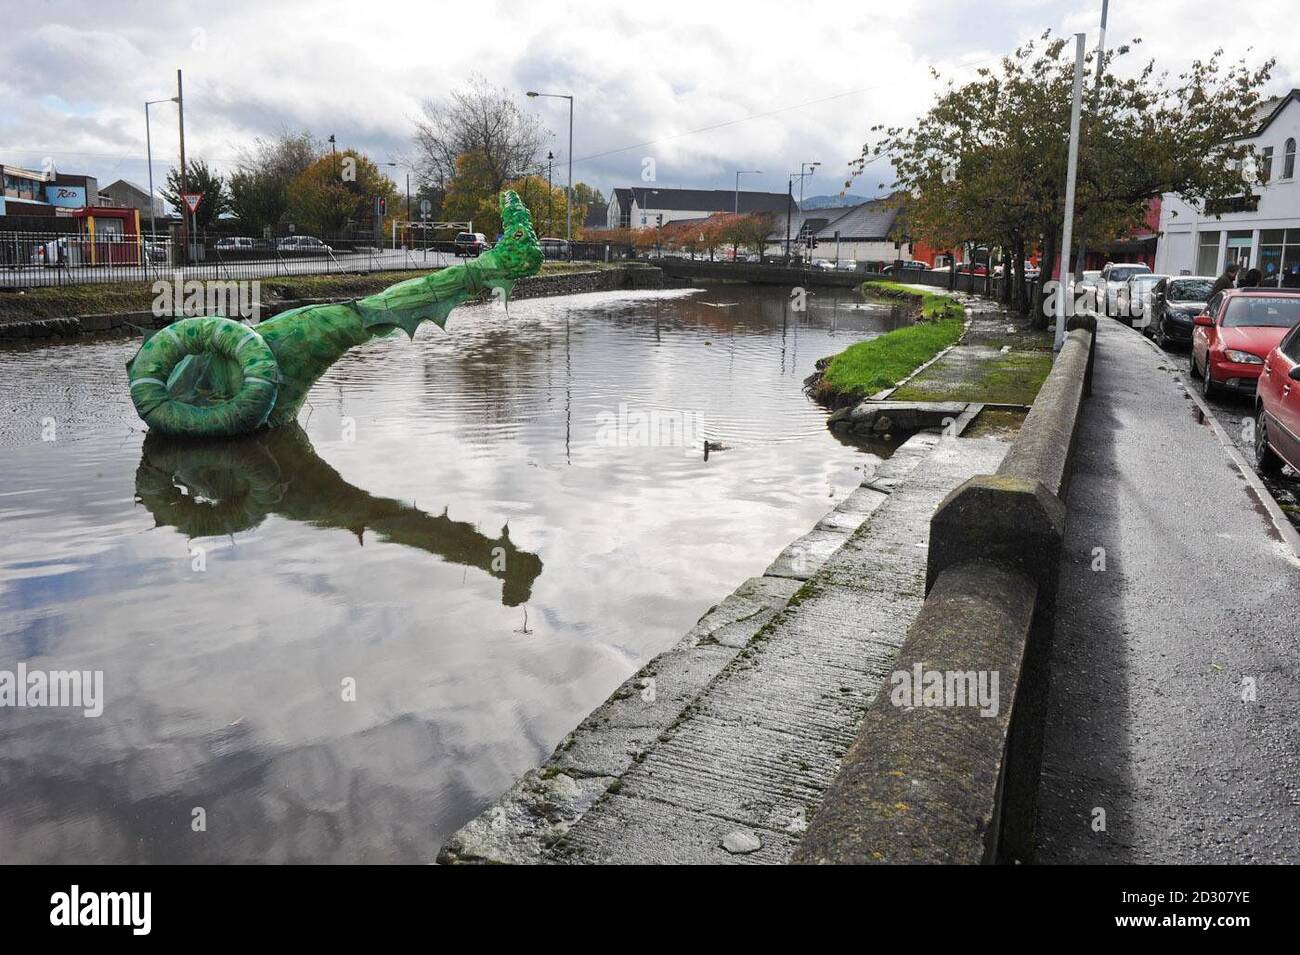 A Hallowe'en decoration in the canal in Newry, County Down succombs to the bad weather. Stock Photo